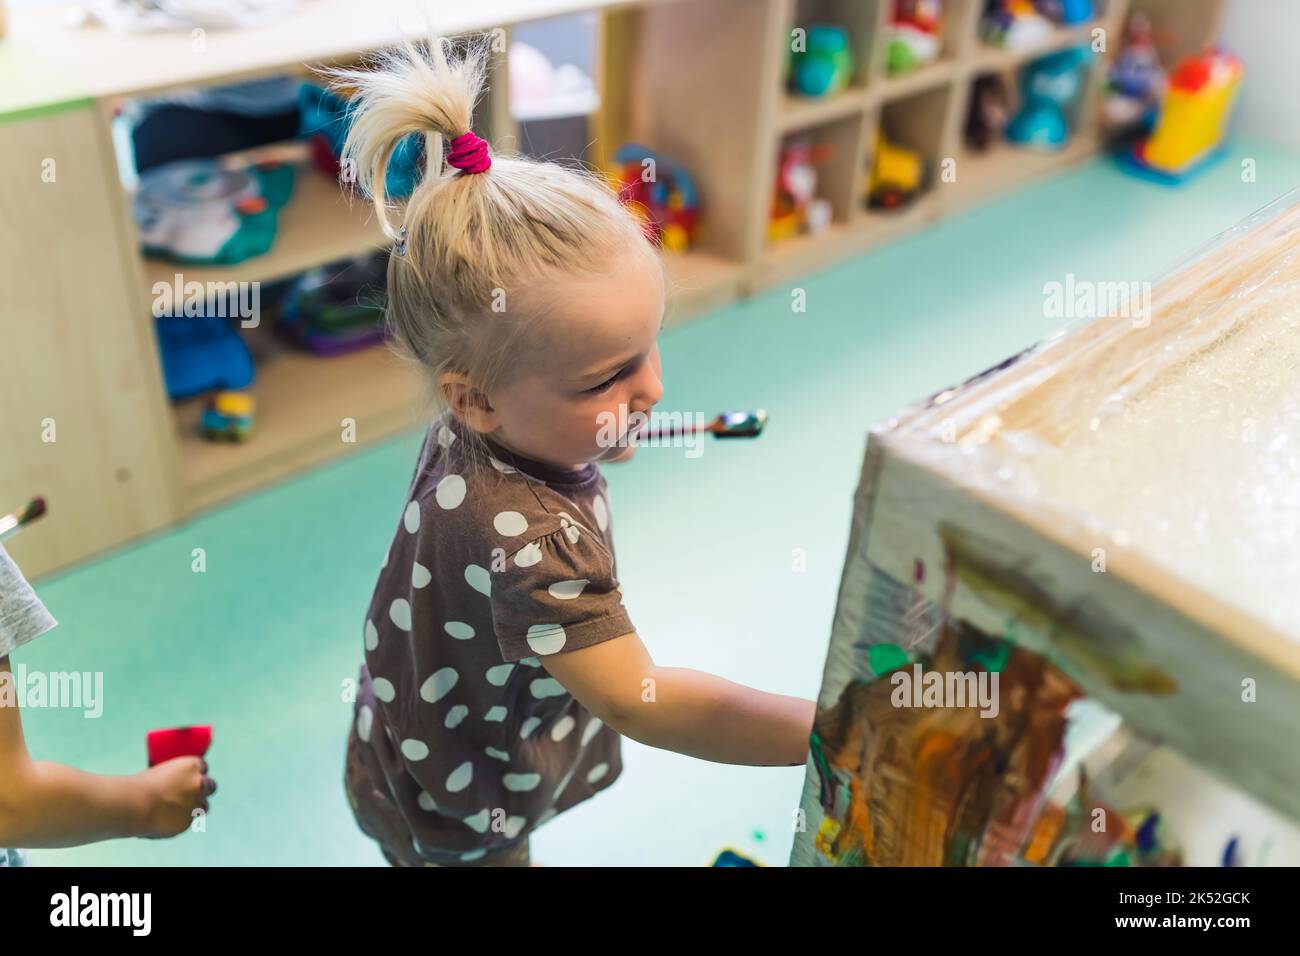 sweet little girl with blond hair having fun and painting with her friends in the nursery, medium shot shelves full of toys in the background. High quality photo Stock Photo